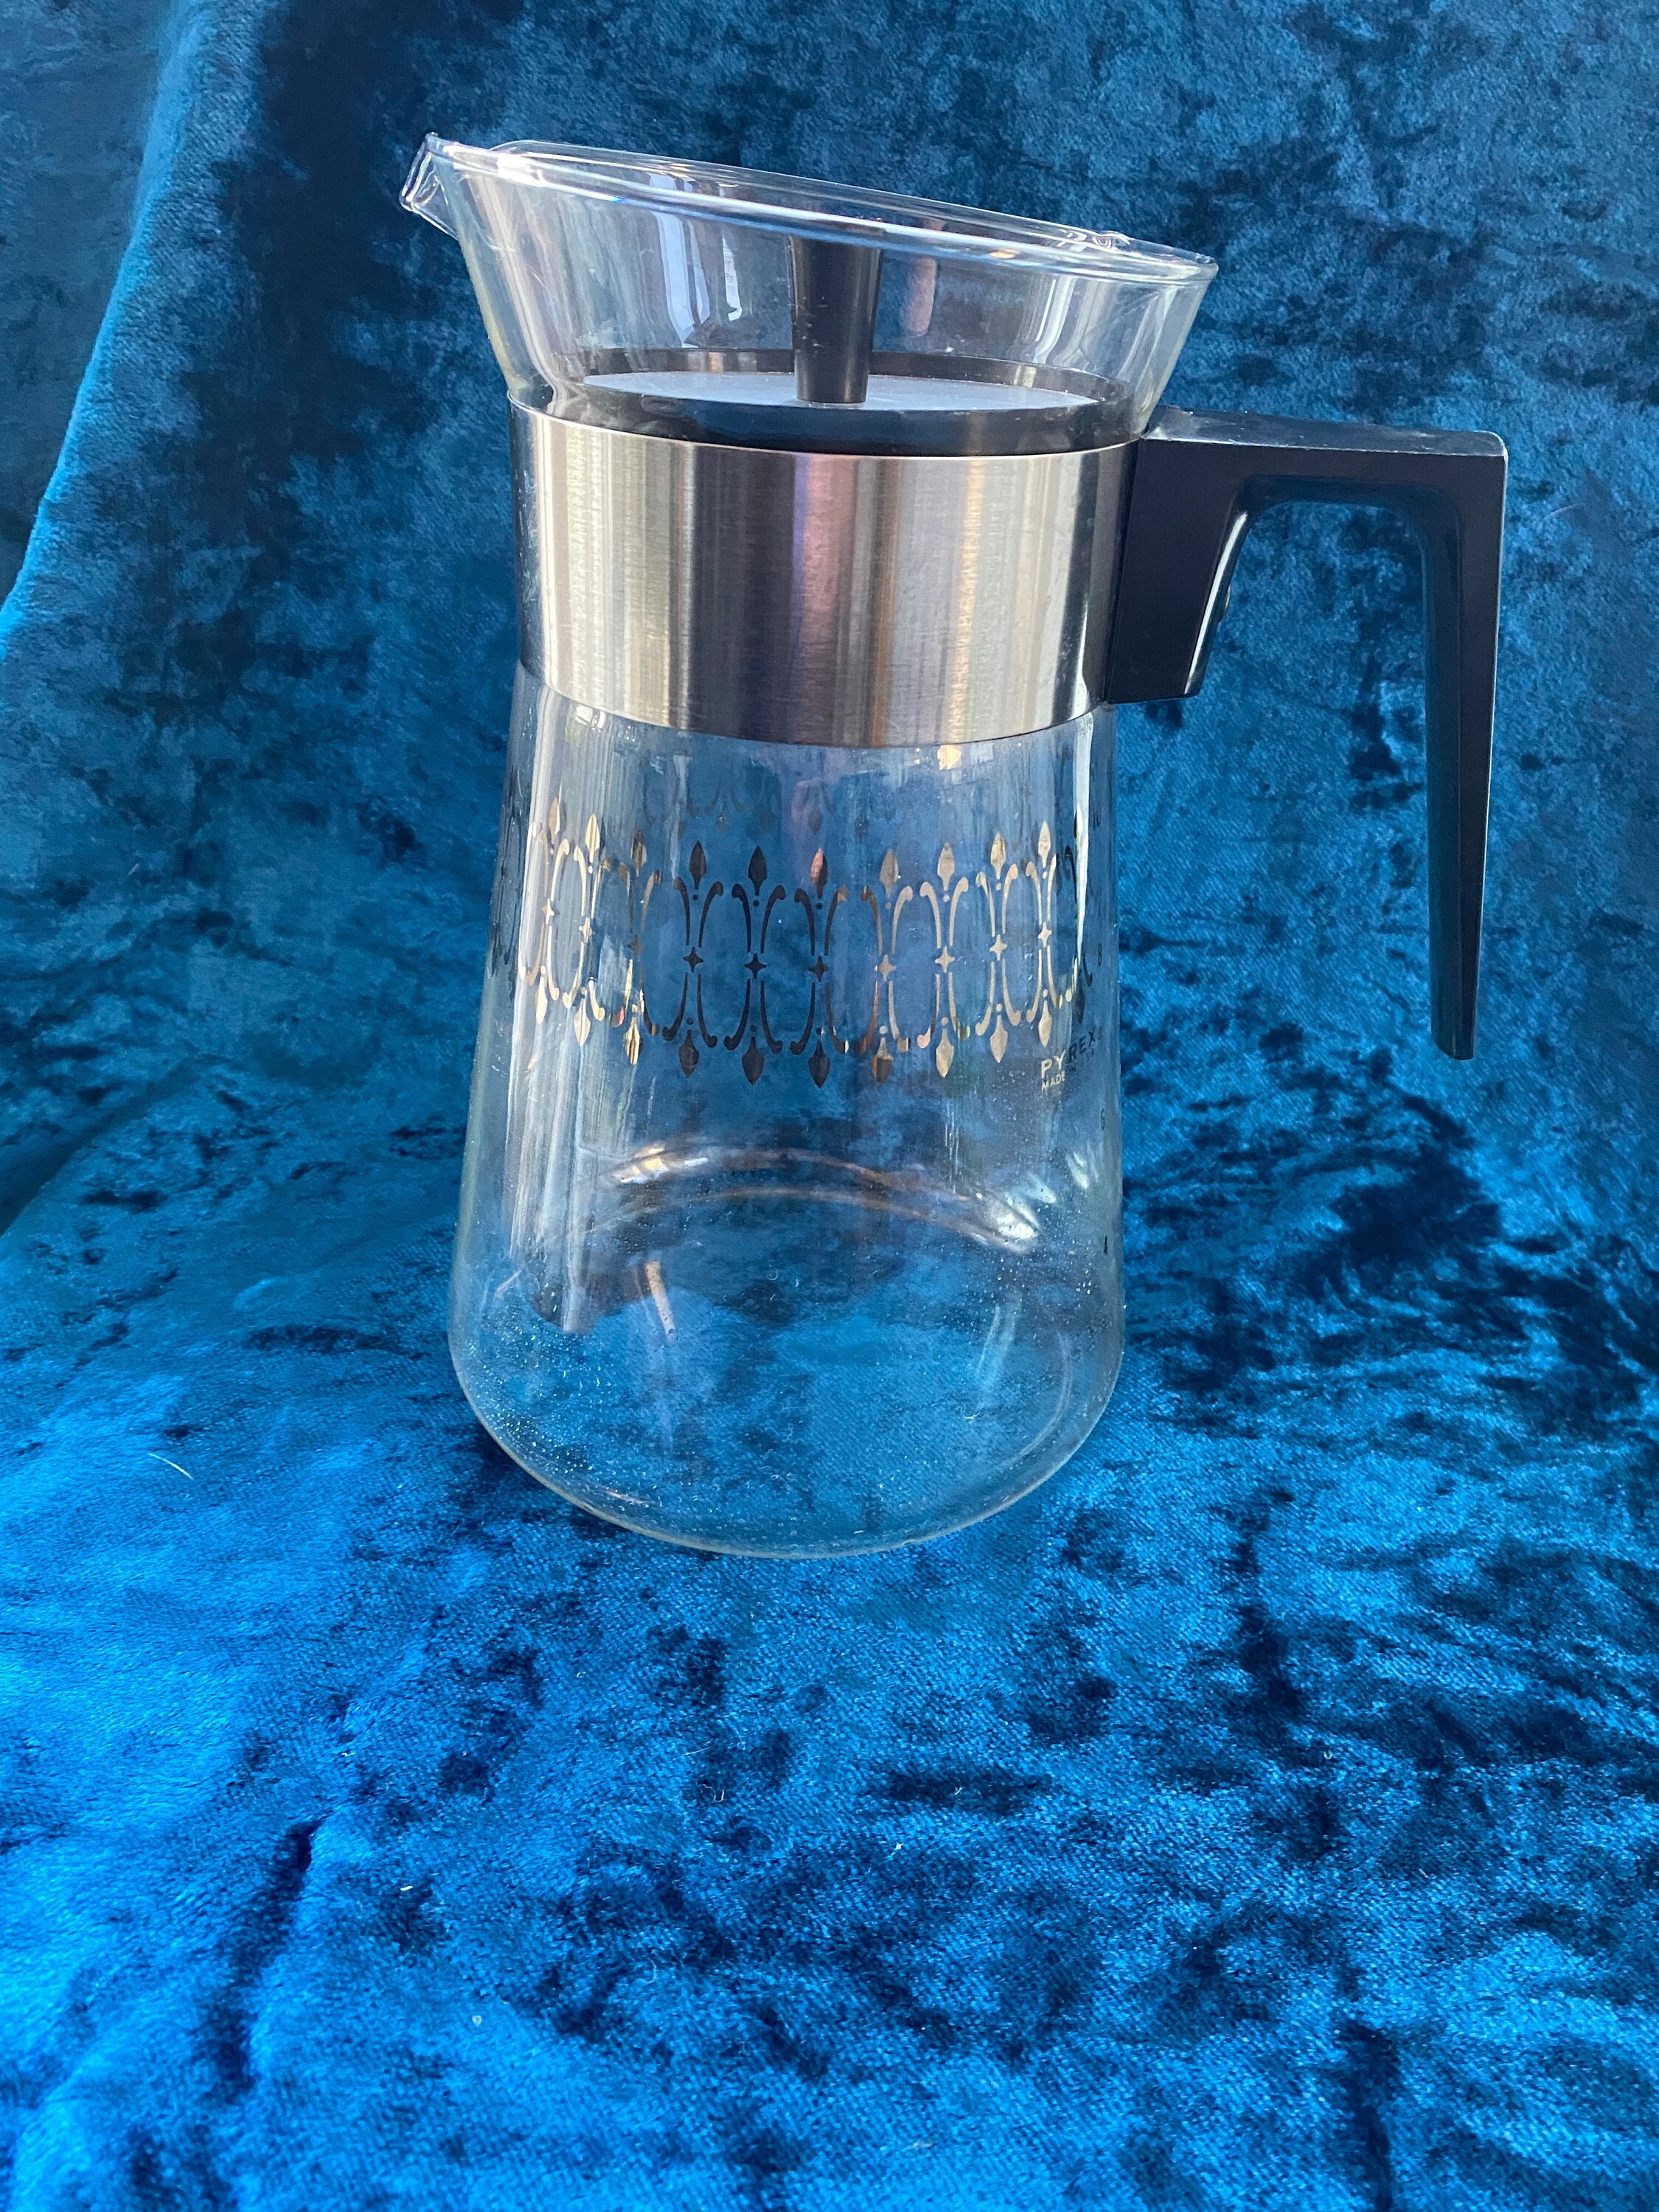 Vintage Black and Decker SPACESAVER 10 Cups Coffee Maker Coffee Carafe Pot  Replacement Parts. 